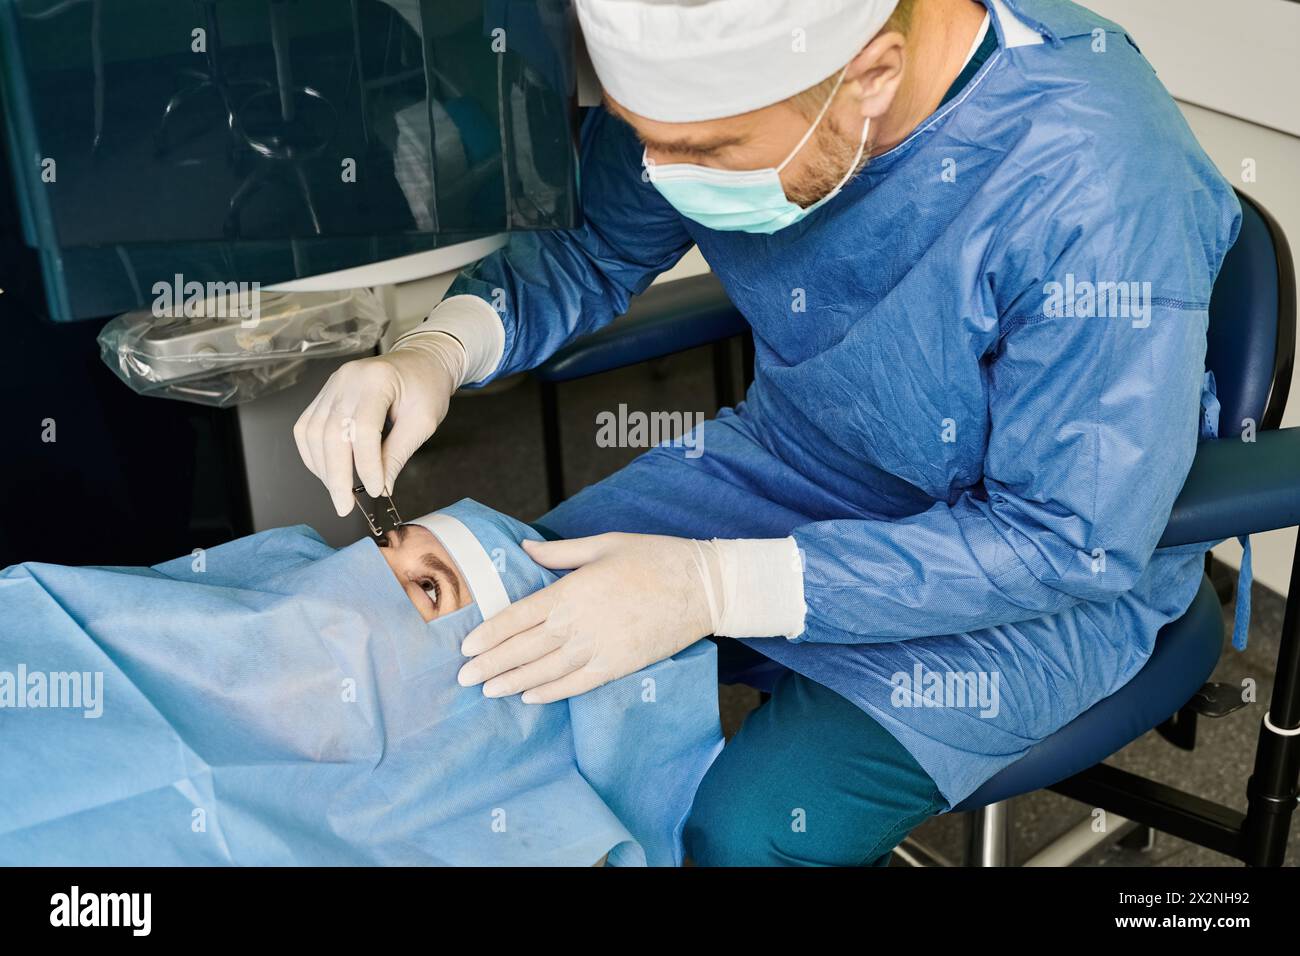 Surgeon in gown performs laser vision correction surgery on patients head. Stock Photo